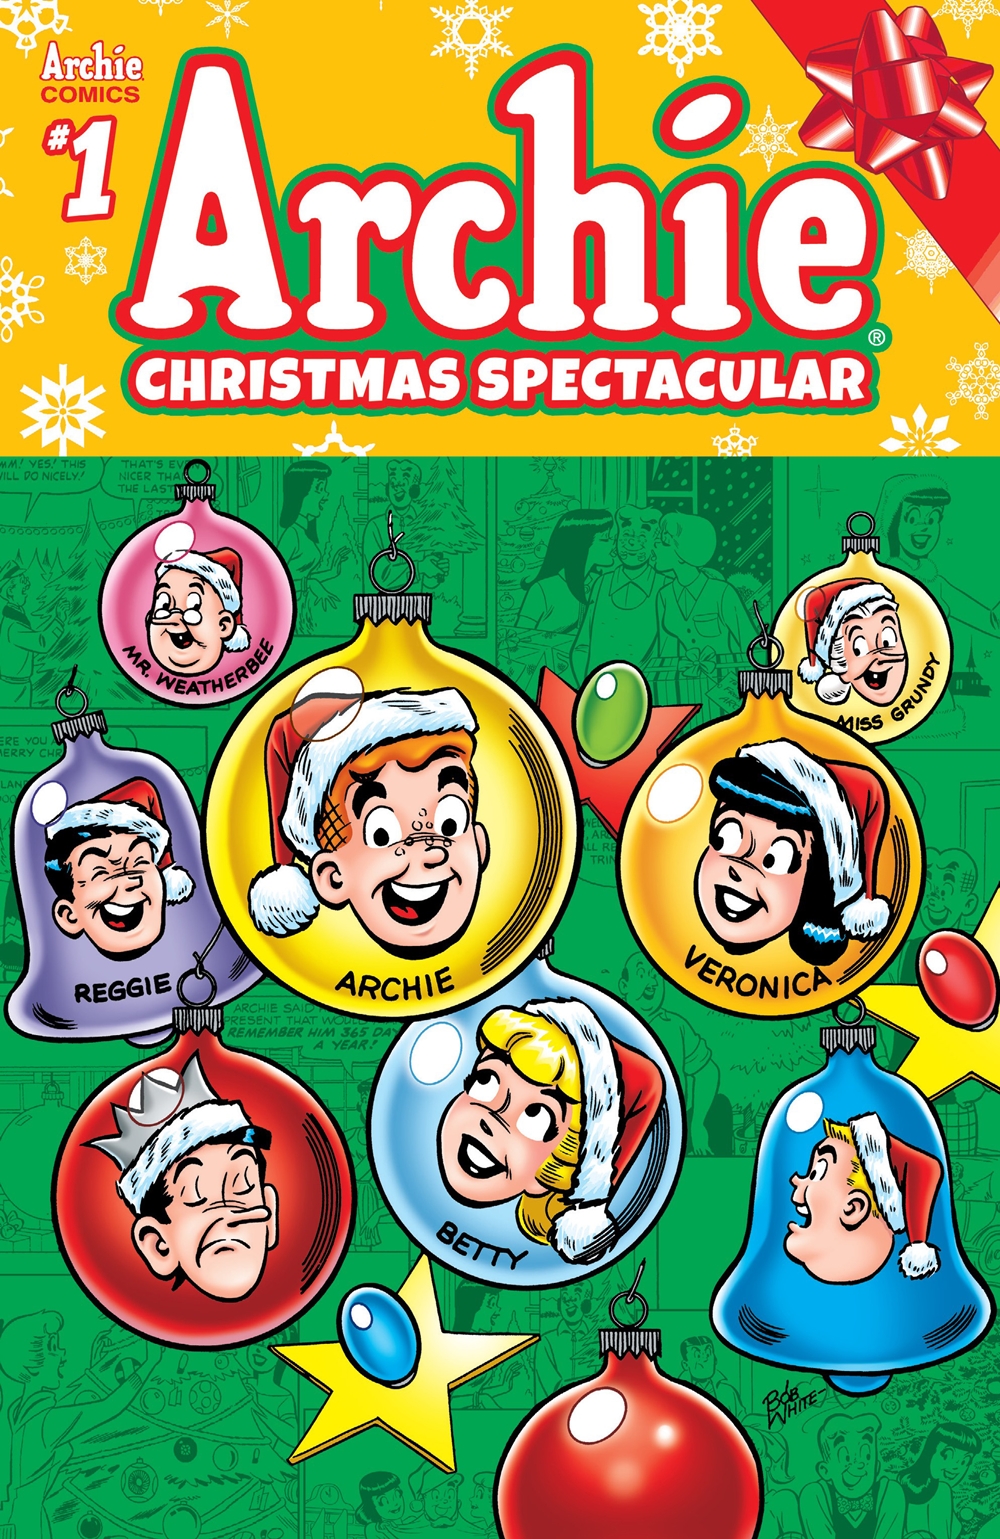 Archie%2527s%2BChristmas%2BSpectacular%2B%25282018%2529-000